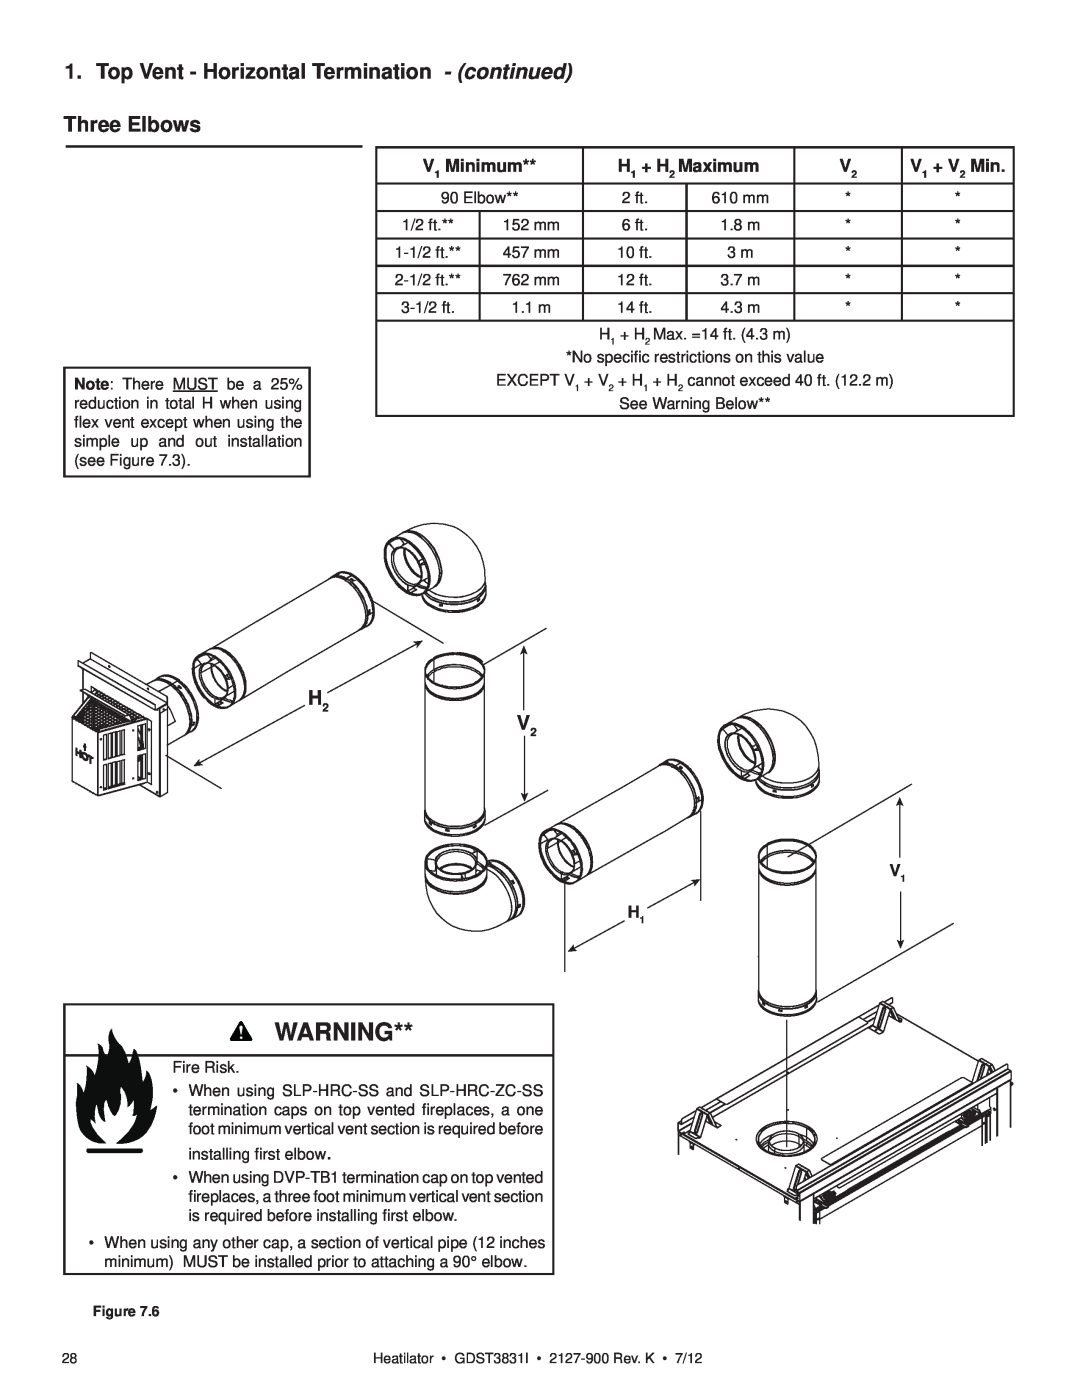 Heatiator GDST3831I owner manual Three Elbows, Top Vent - Horizontal Termination - continued, H2 